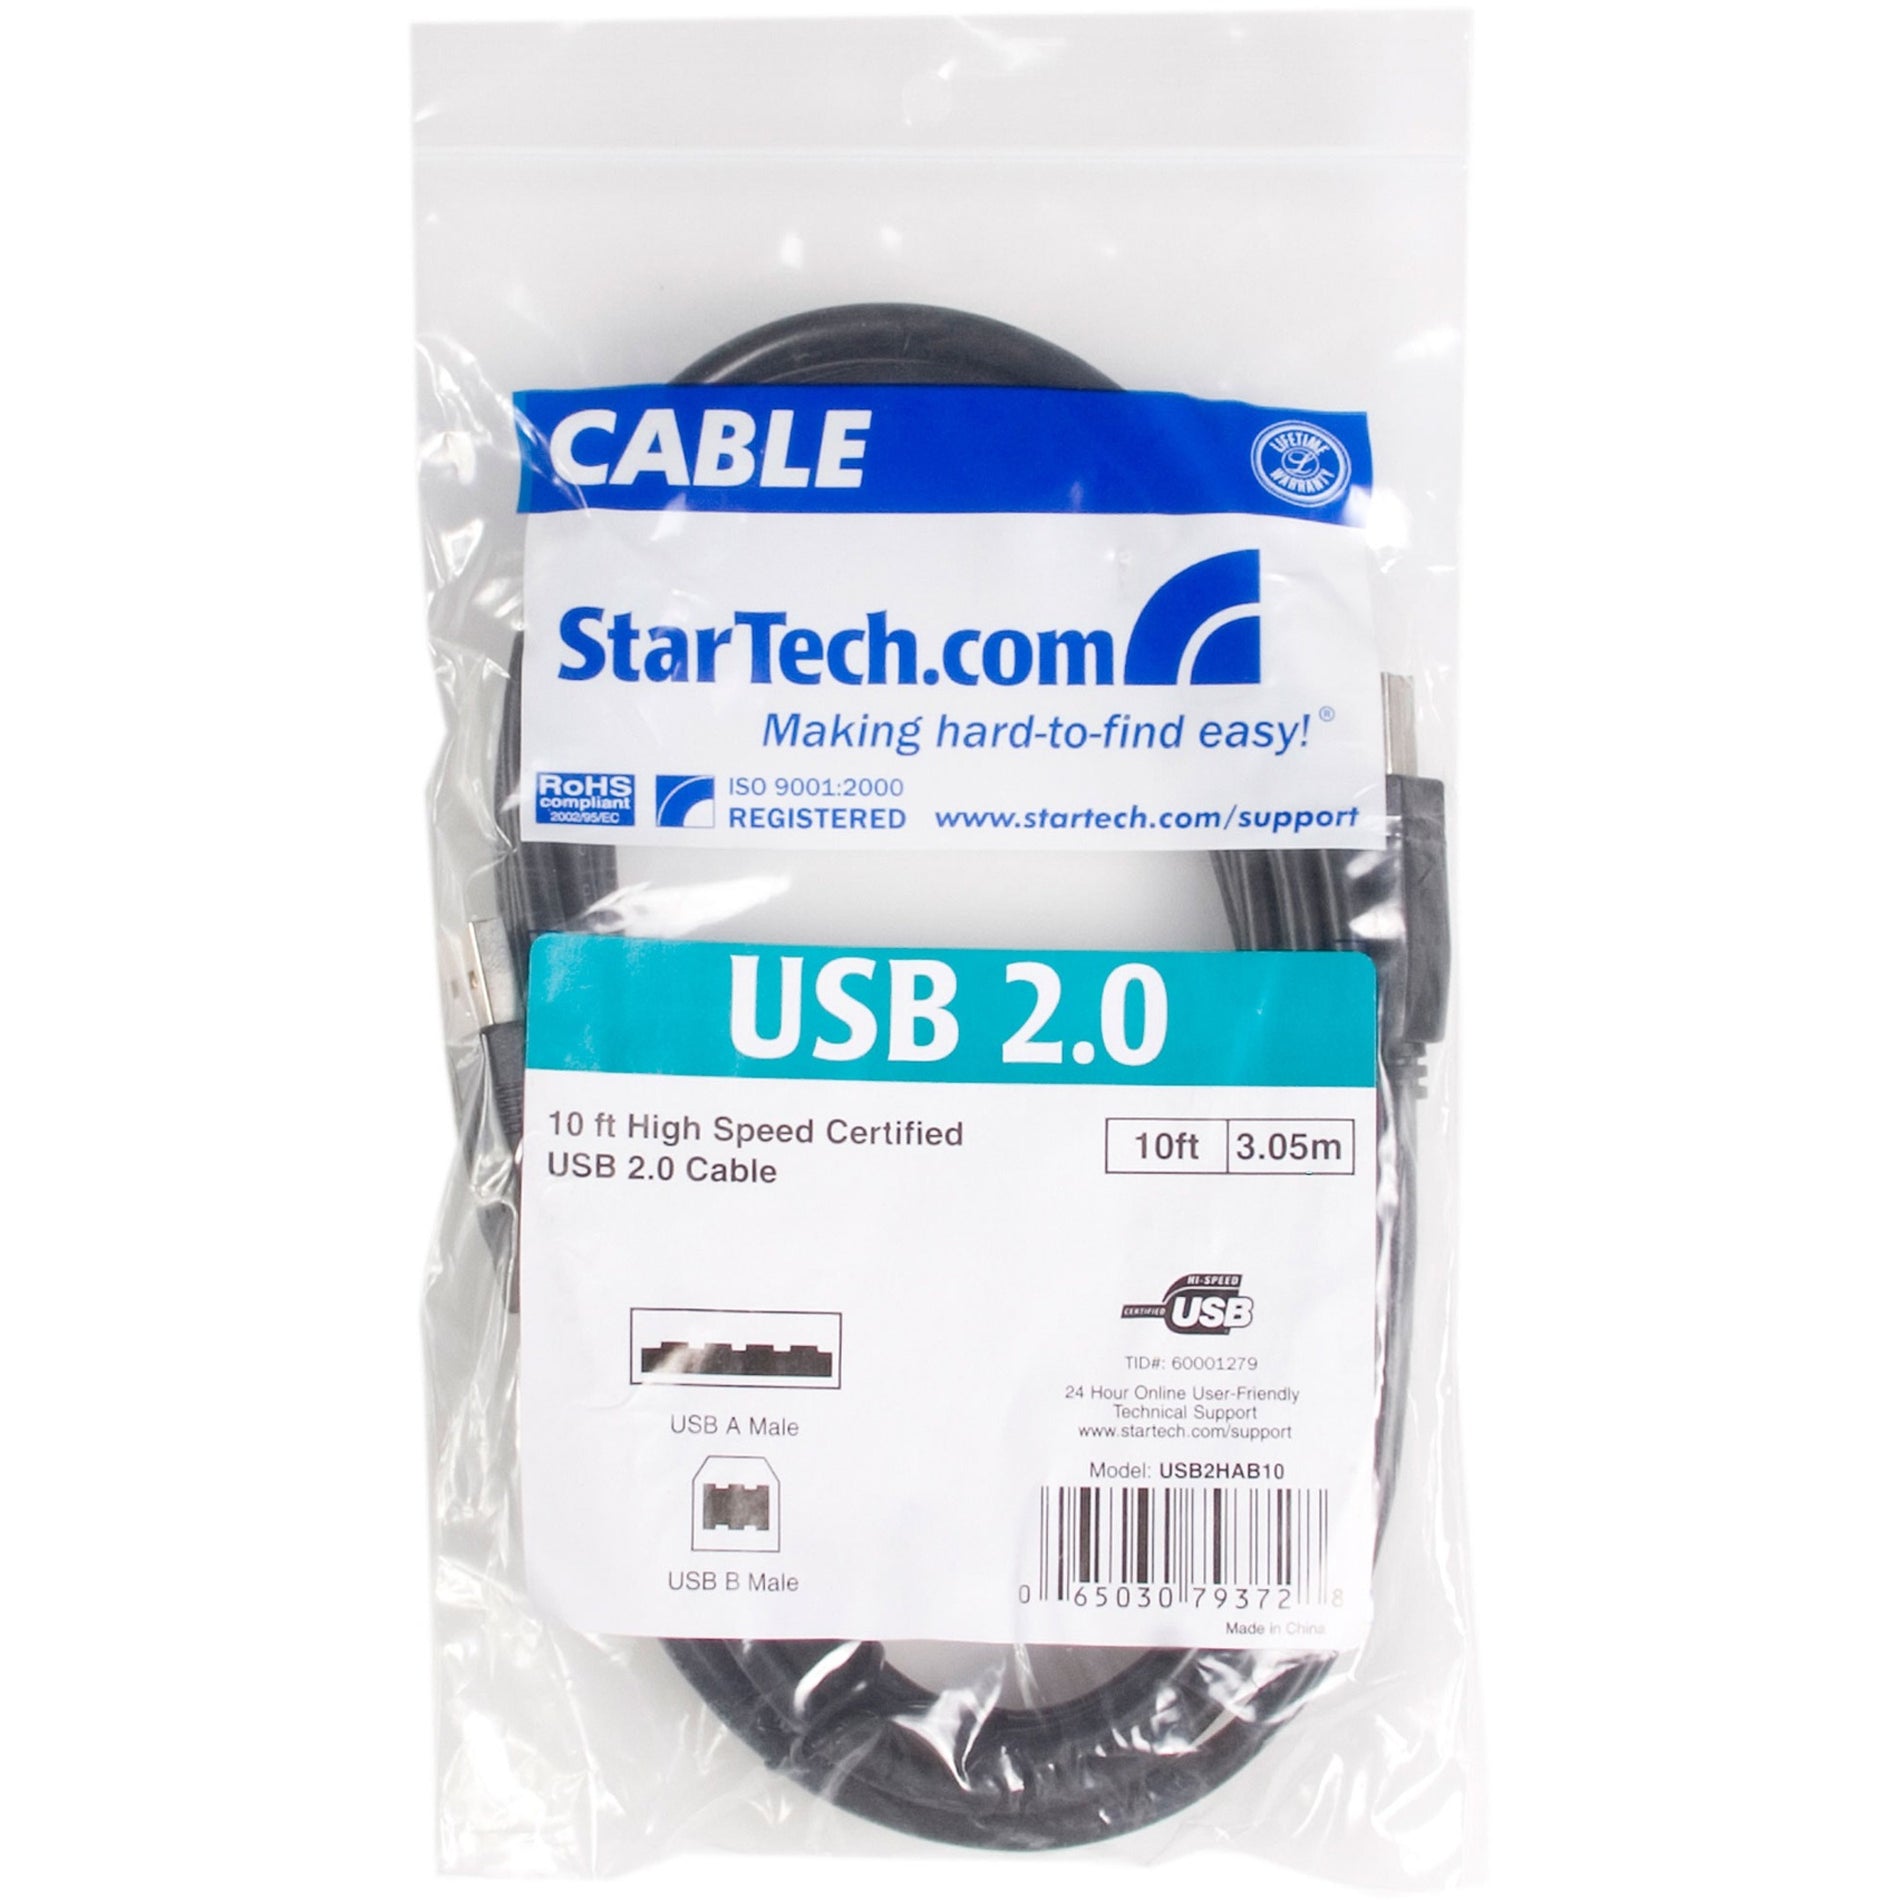 StarTech.com USB2HAB10 High Speed Certified USB 2.0 USB Cable, 10 ft Data Transfer Cable